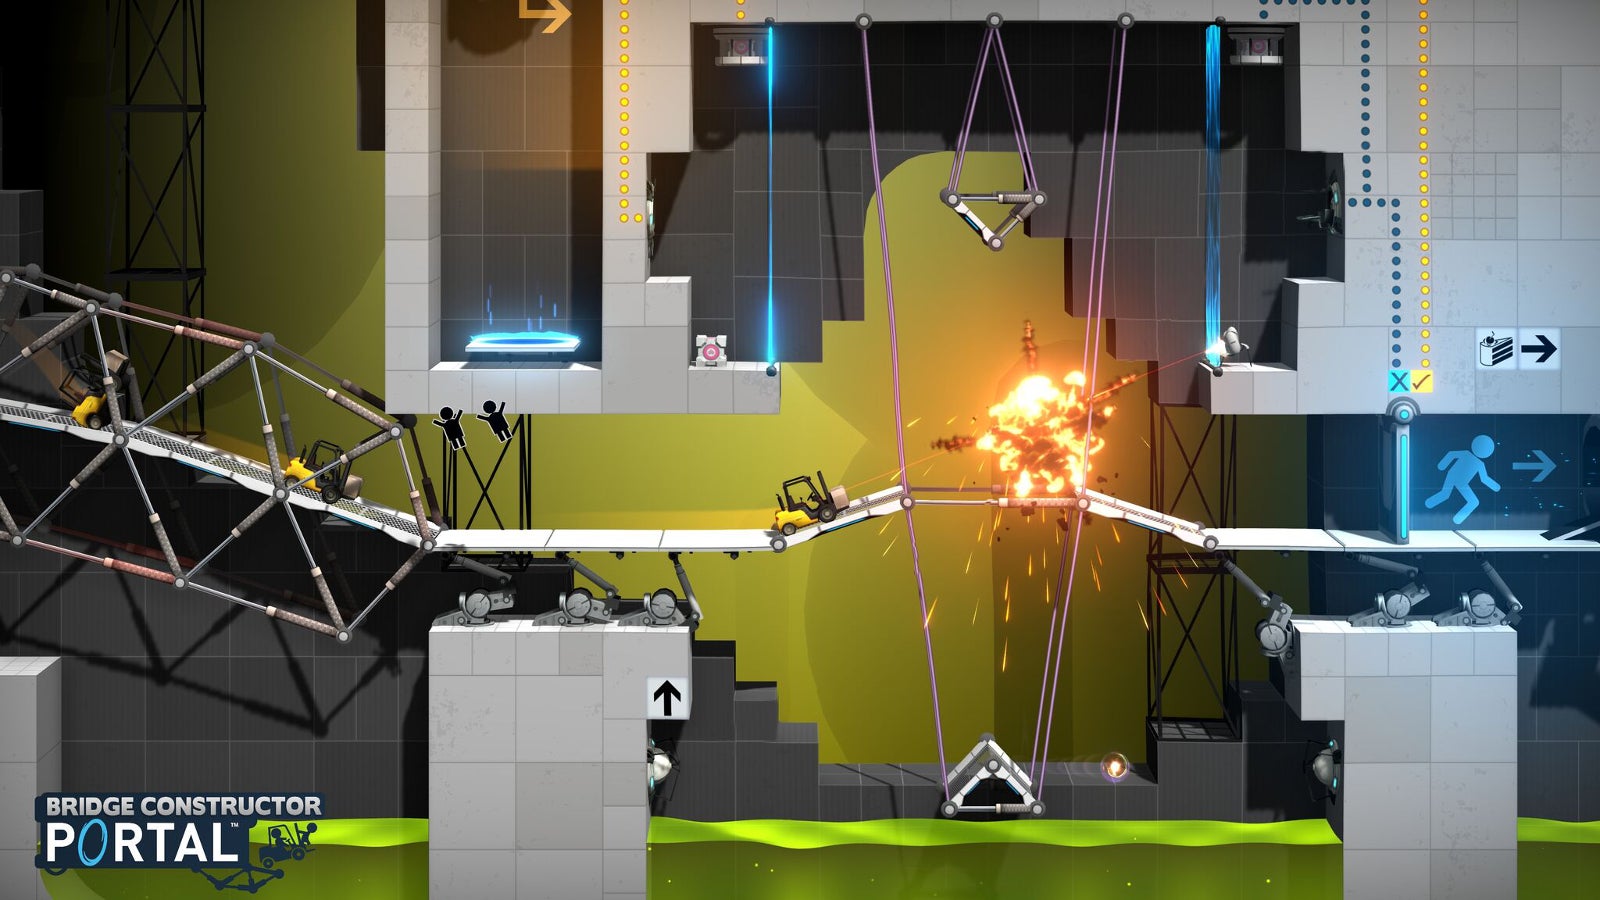 Well, it&#039;s not that simple... - Bridge Constructor Portal review: a puzzler with great physics and witty humor